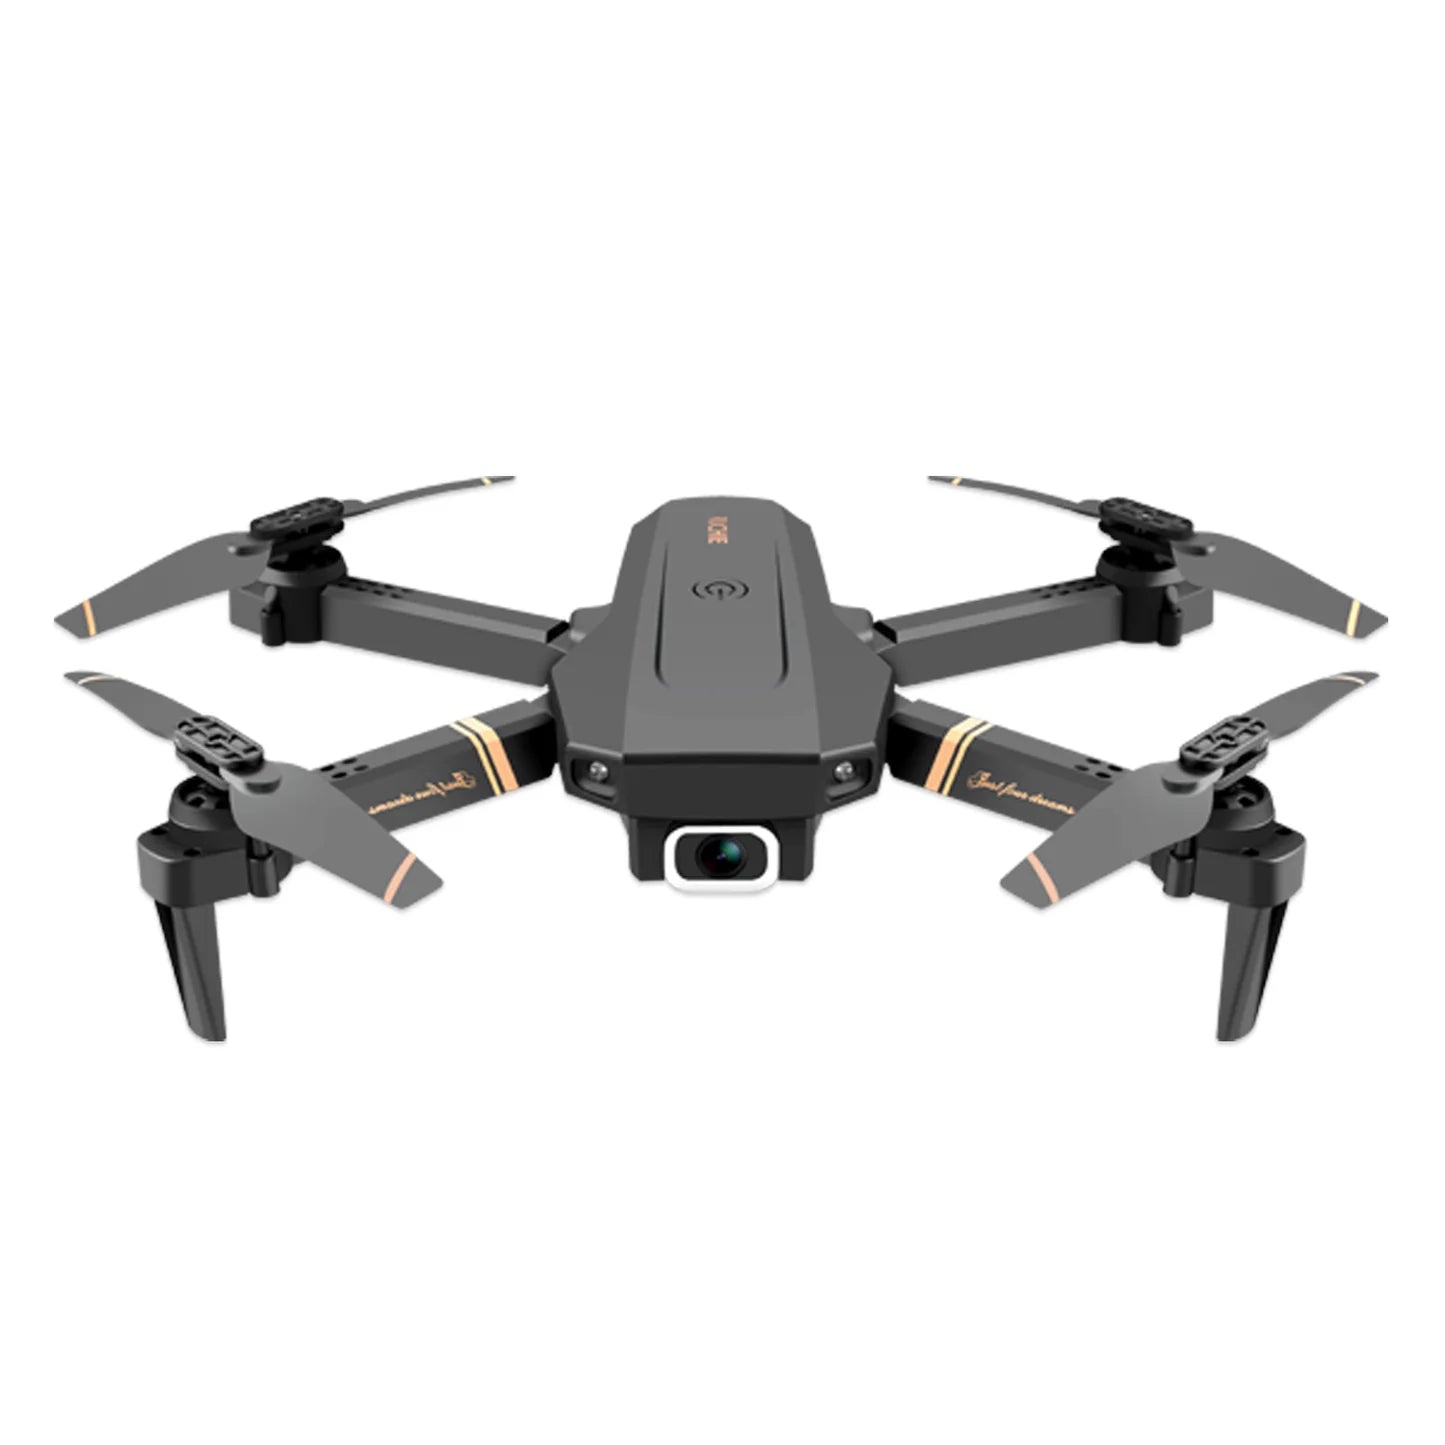 V4 Rc Drone - 4k HD Wide Angle Camera 1080P WiFi fpv Drone Dual Camera Quadcopter Real-time transmission Helicopter Dron Gift Toys